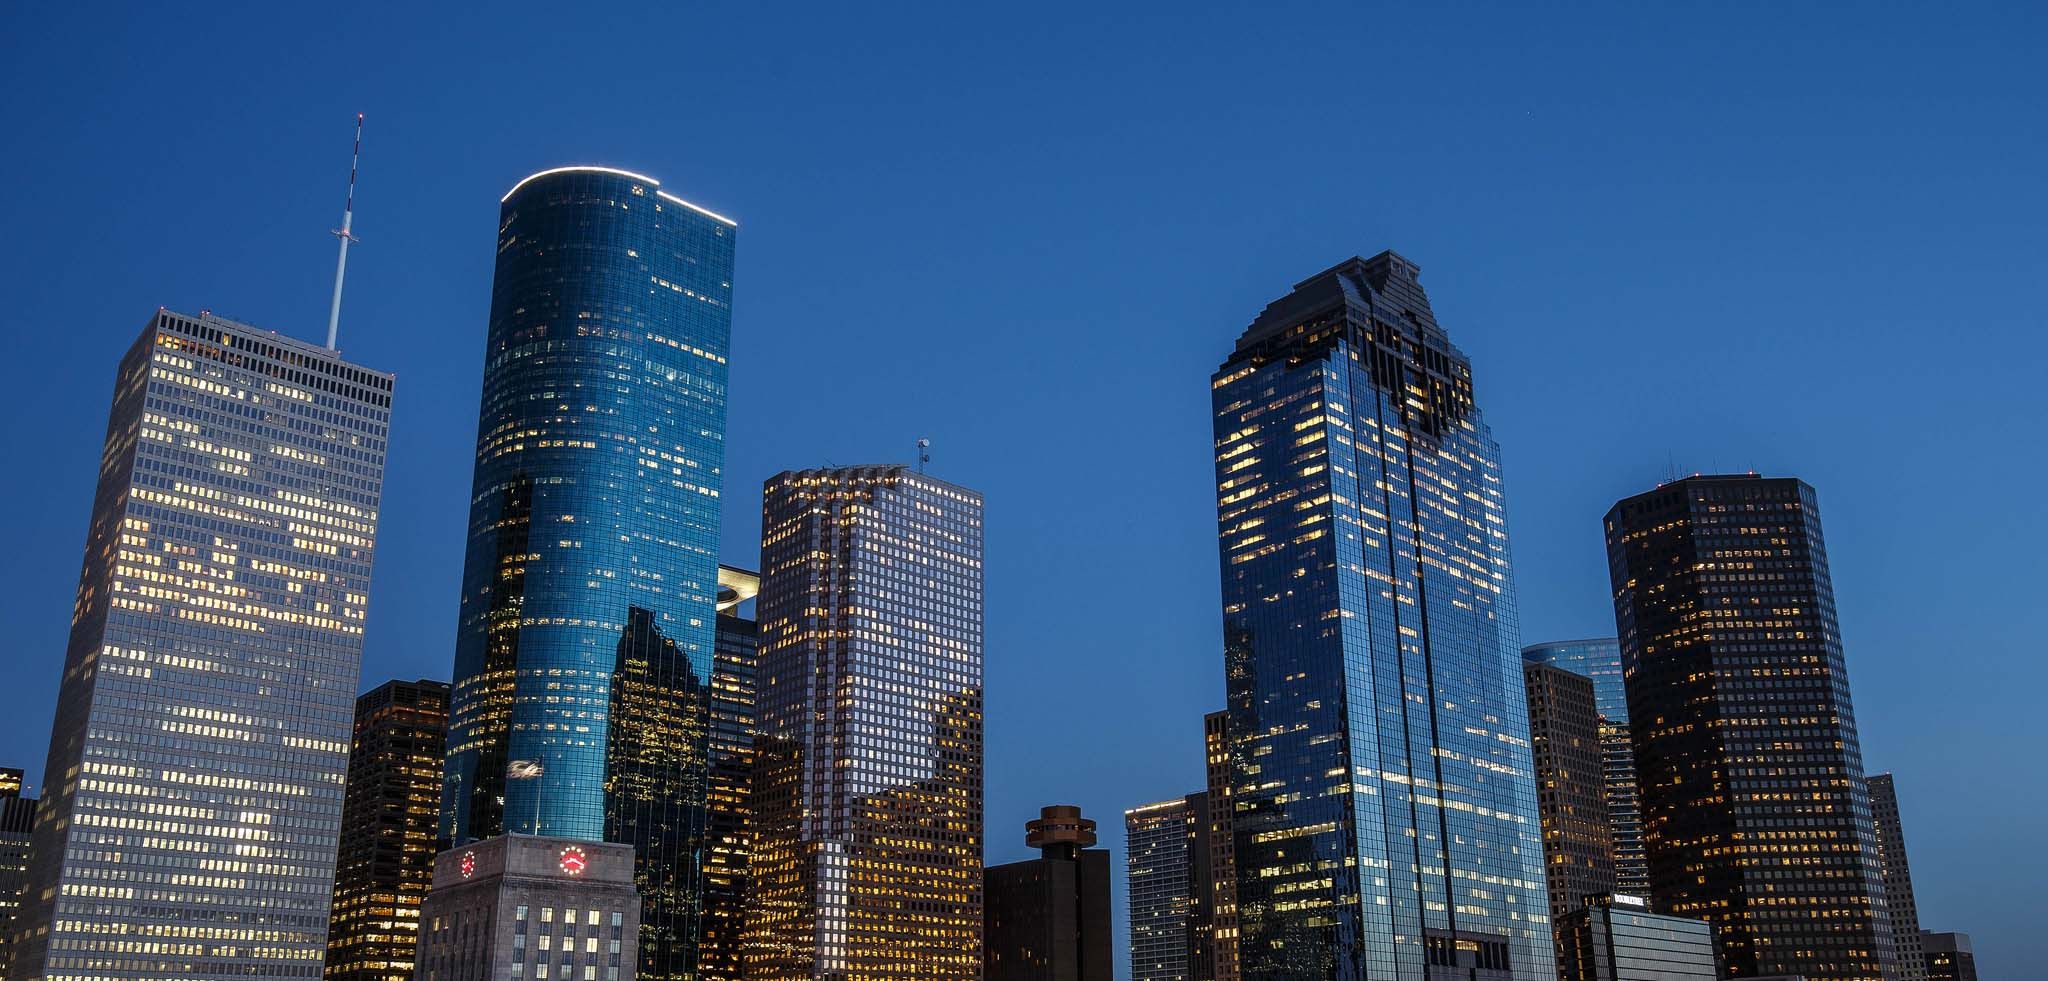 Recurrent is a Houston-based investment firm focused on opportunities created by energy cycles.